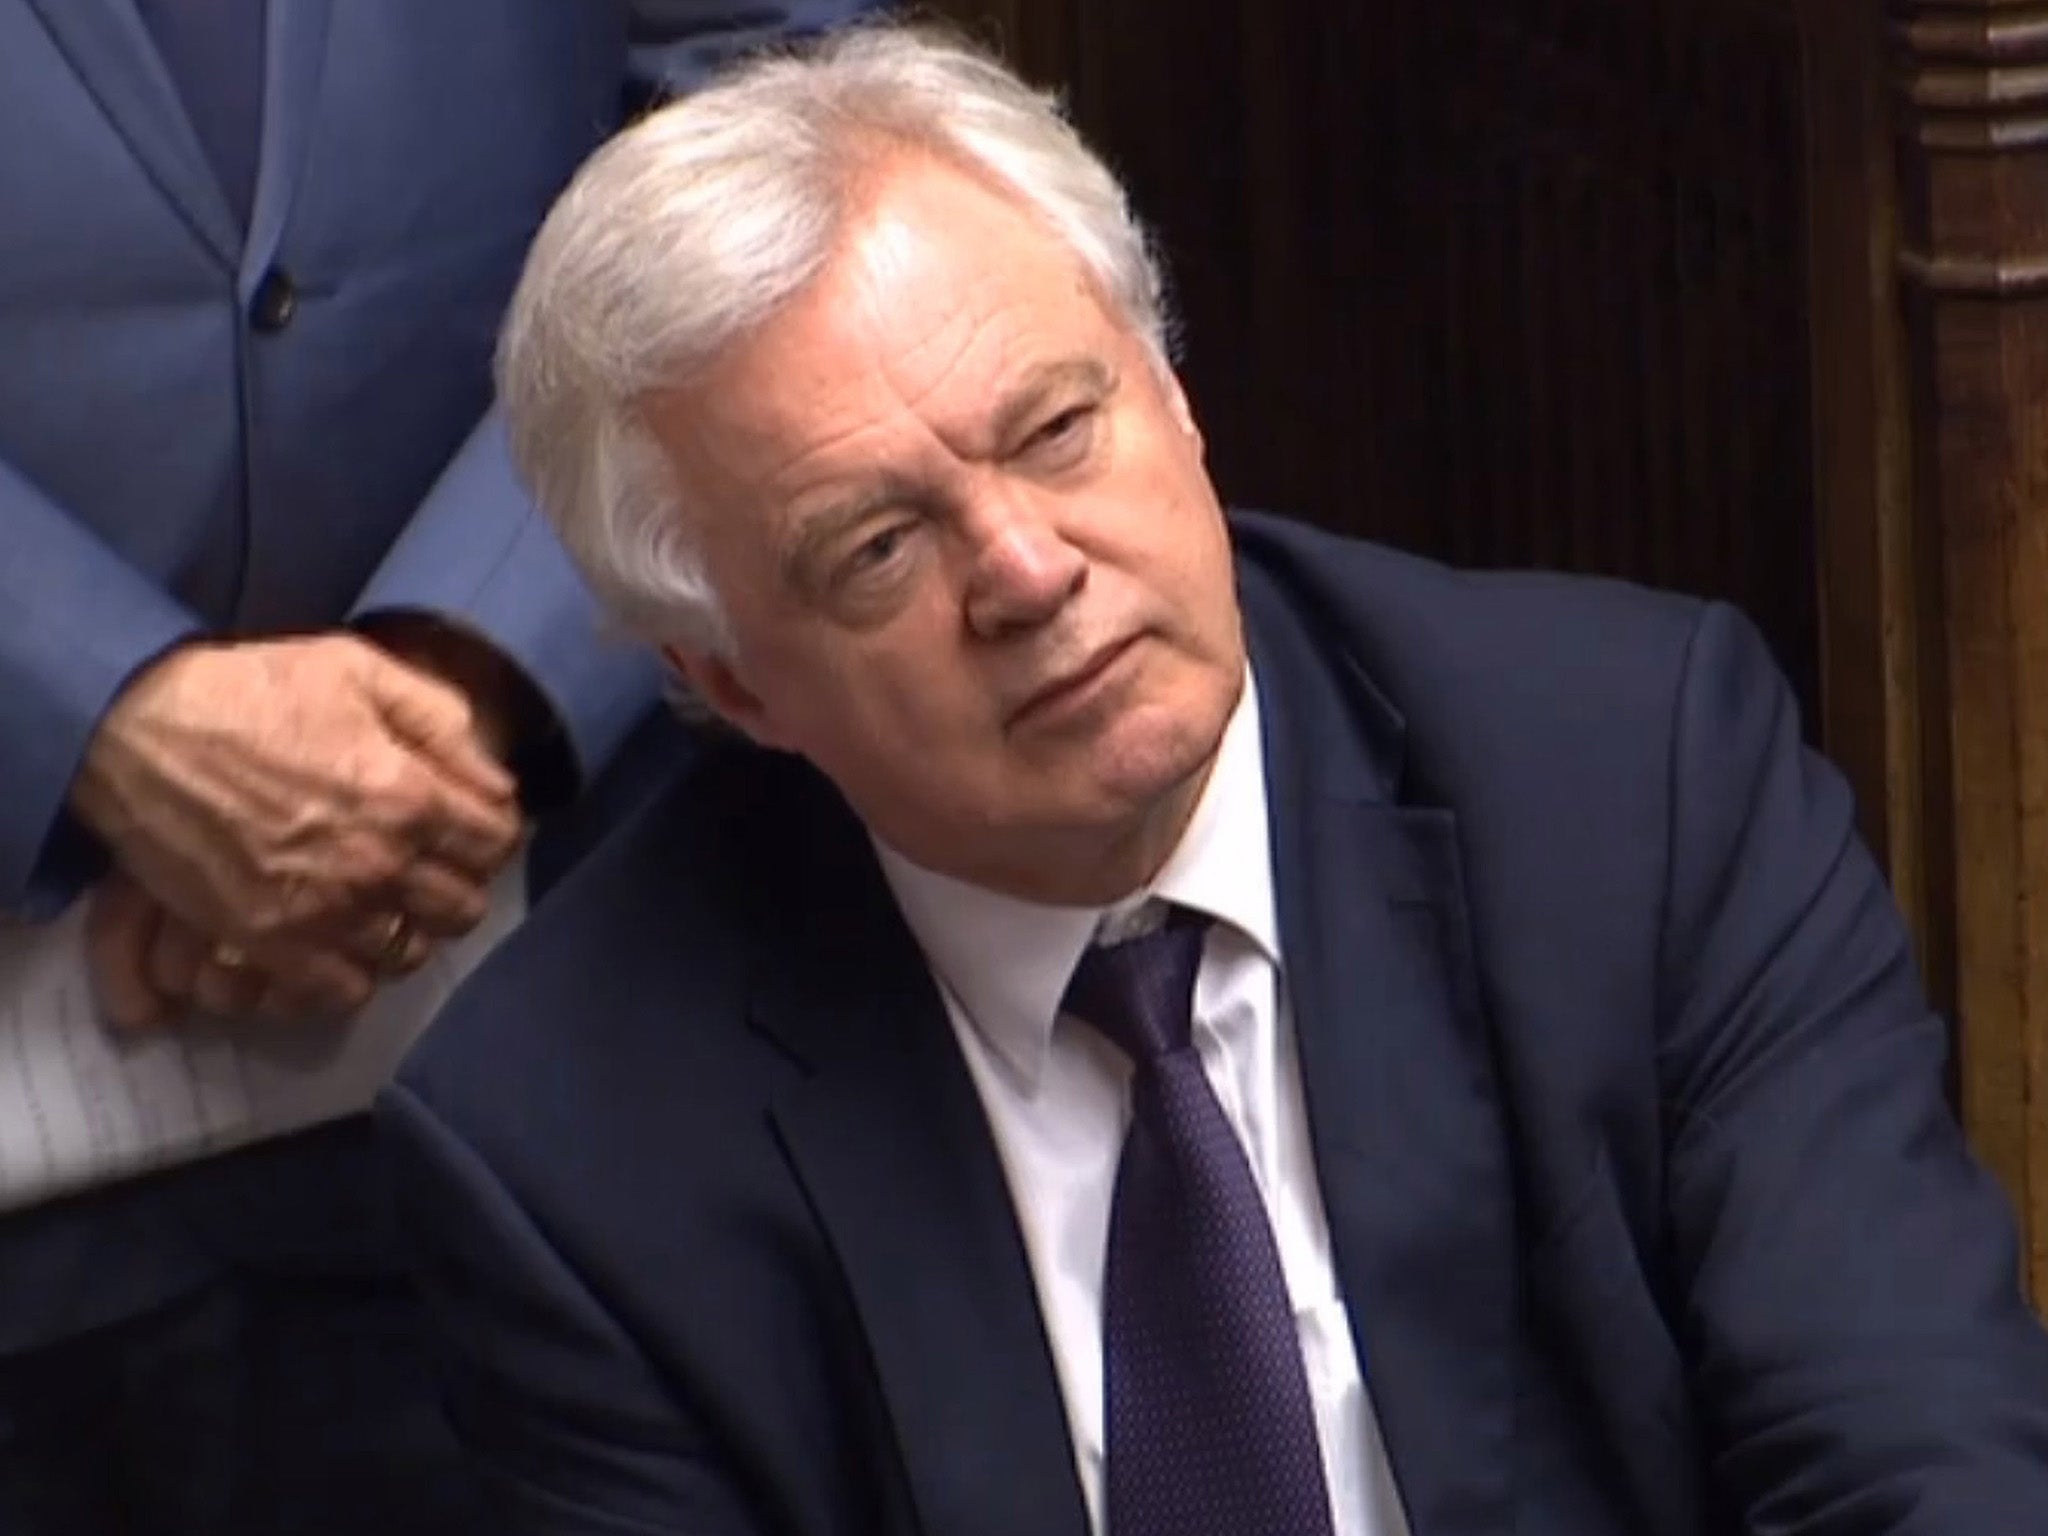 David Davis is reluctant to let anyone know anything about Brexit